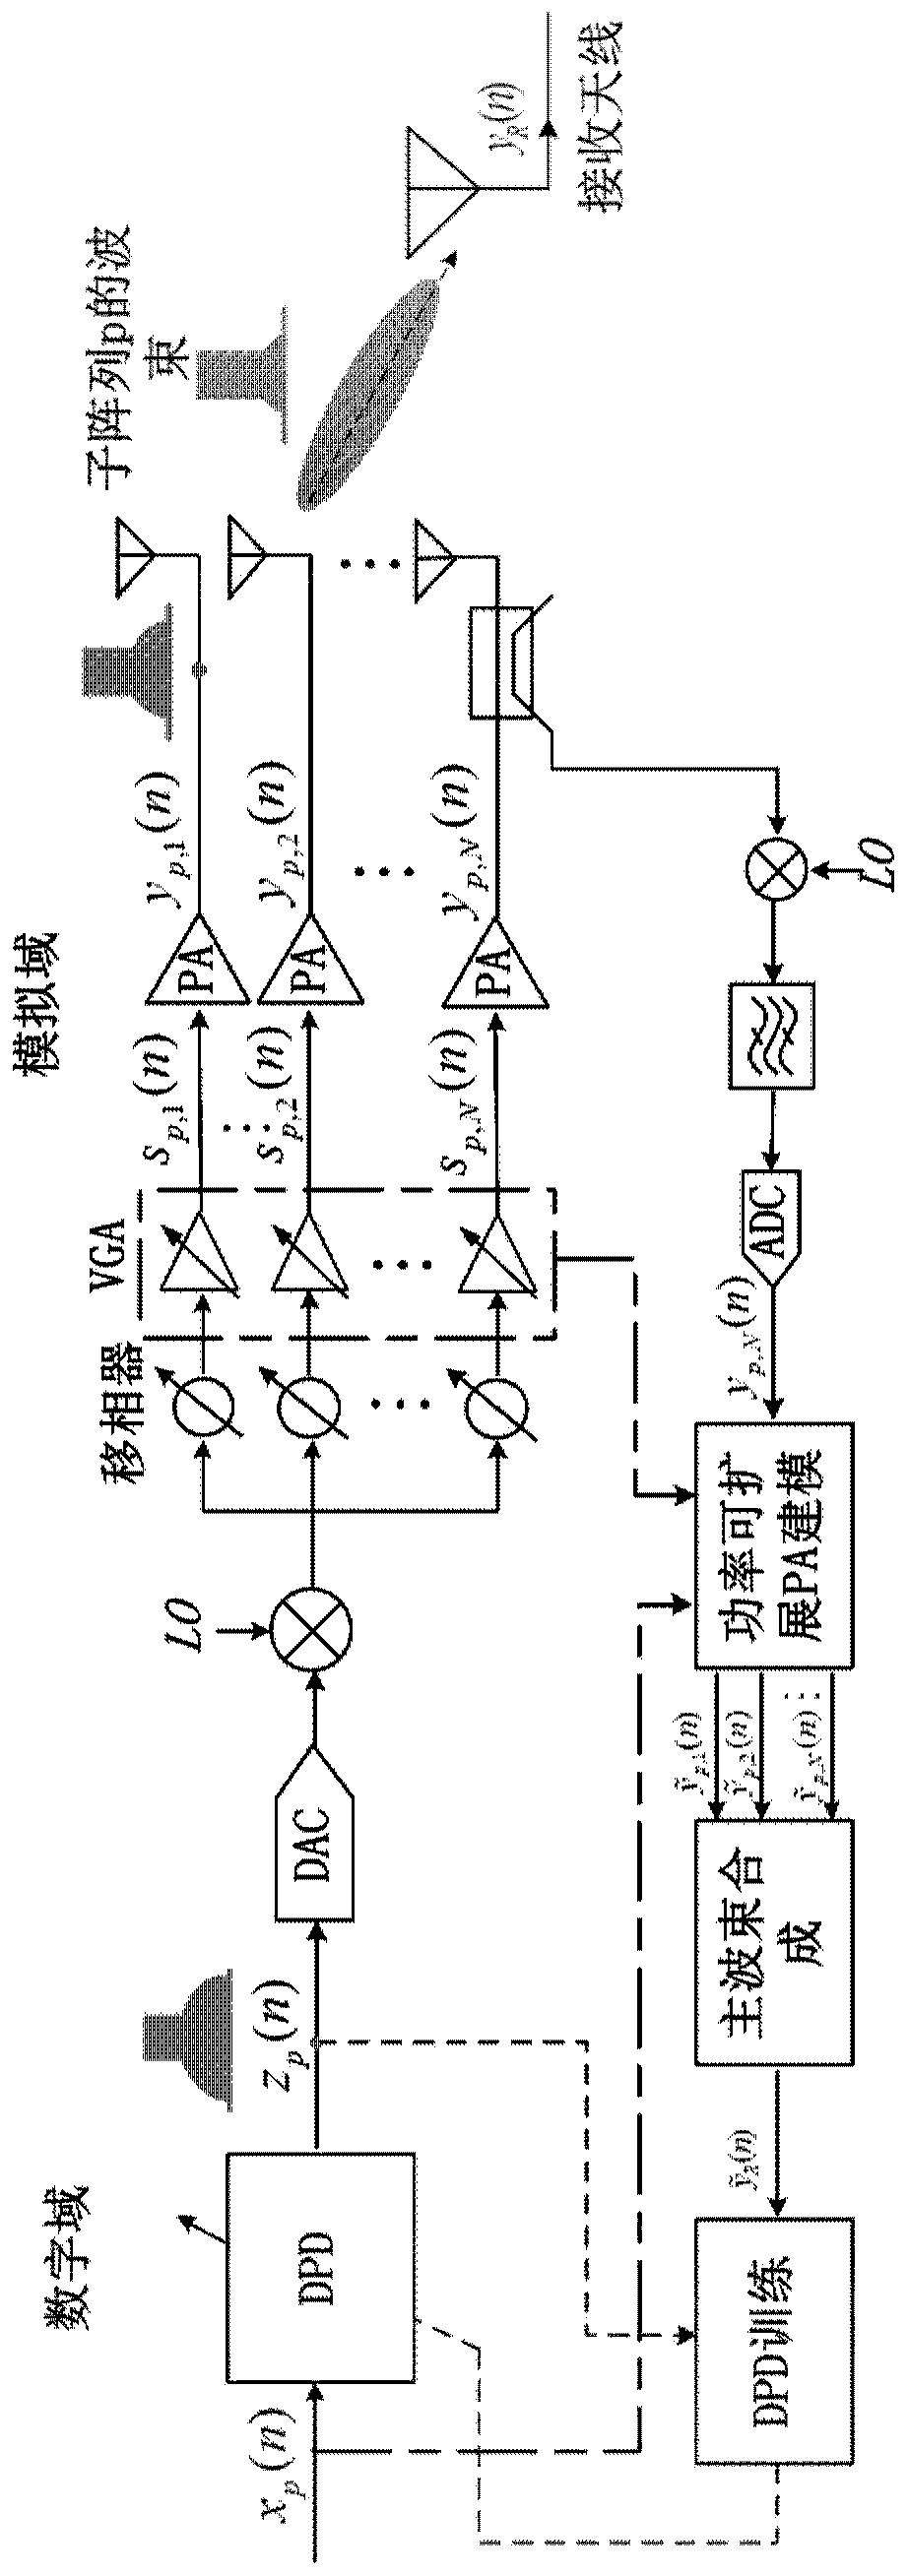 Power-extensible beam directional digital pre-distortion device and method, and transceiving system